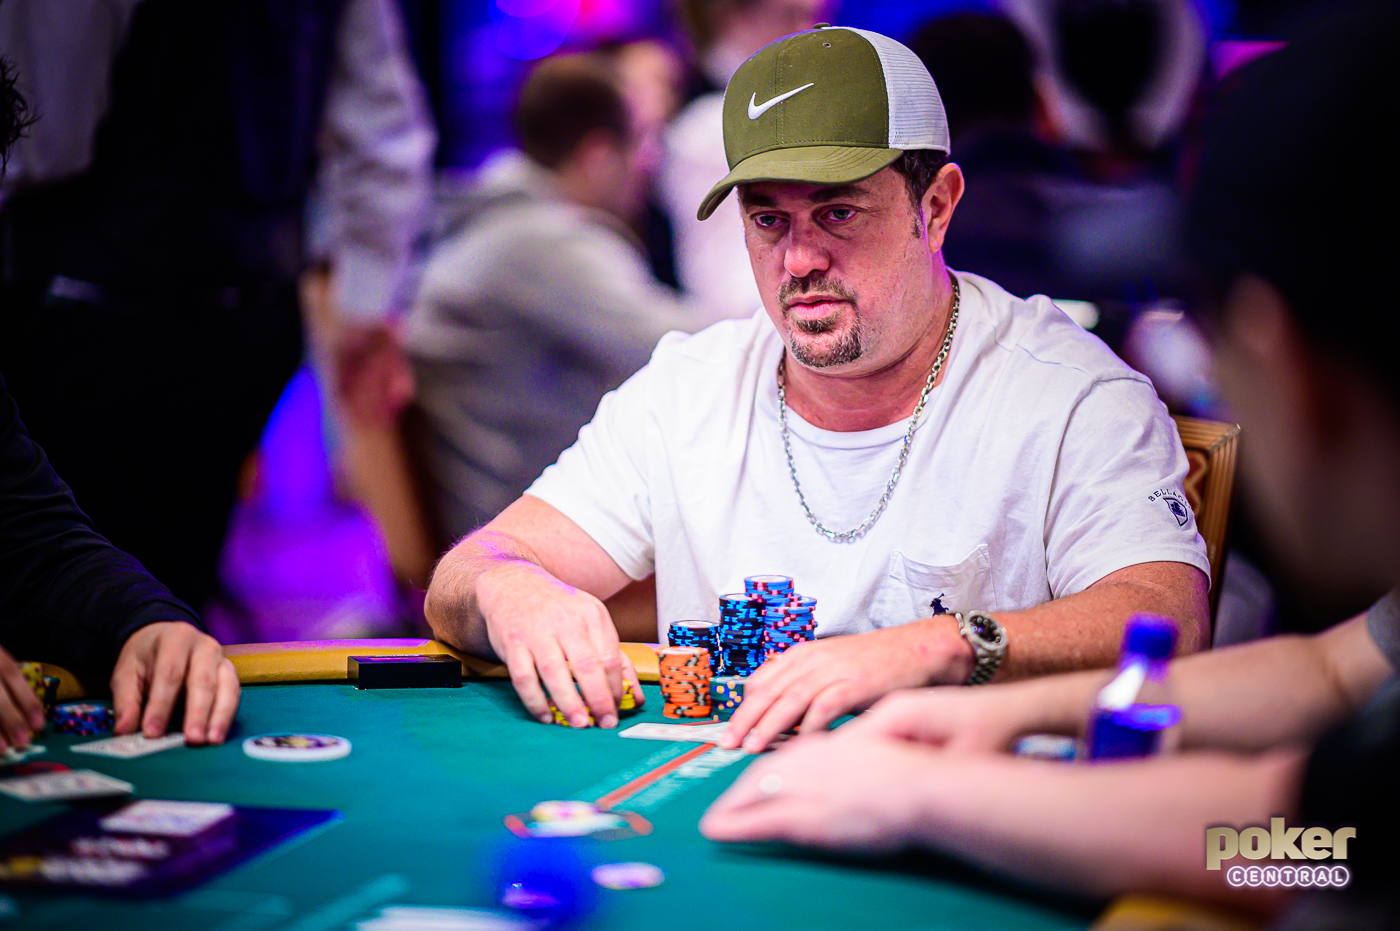 David Oppenheim has played high stakes cash games for well over two decades and continues to crush.